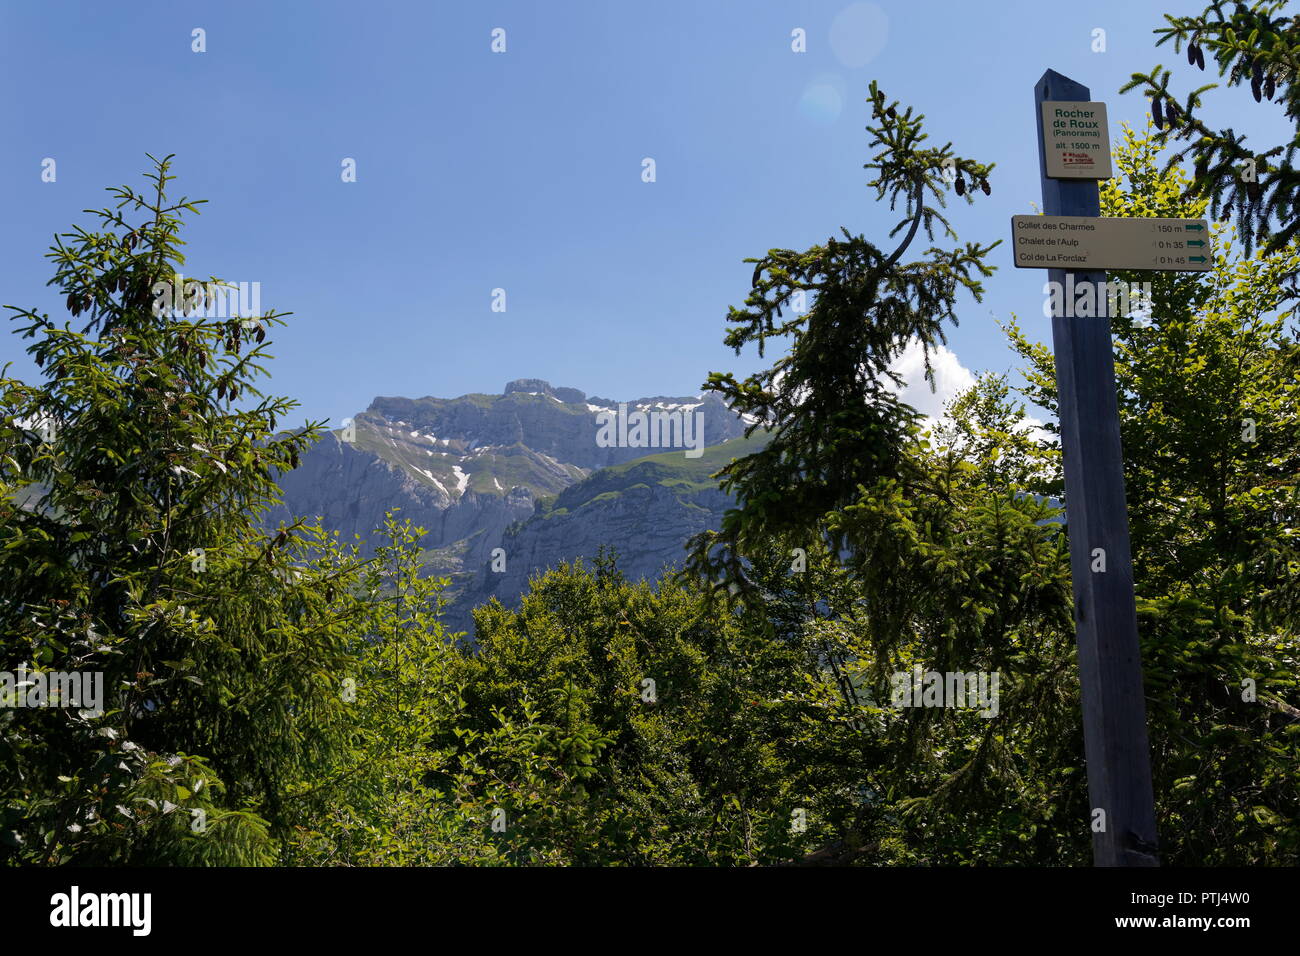 View of La Tournette and signpost from one of many walking trails around Col de la Forclaz France Stock Photo